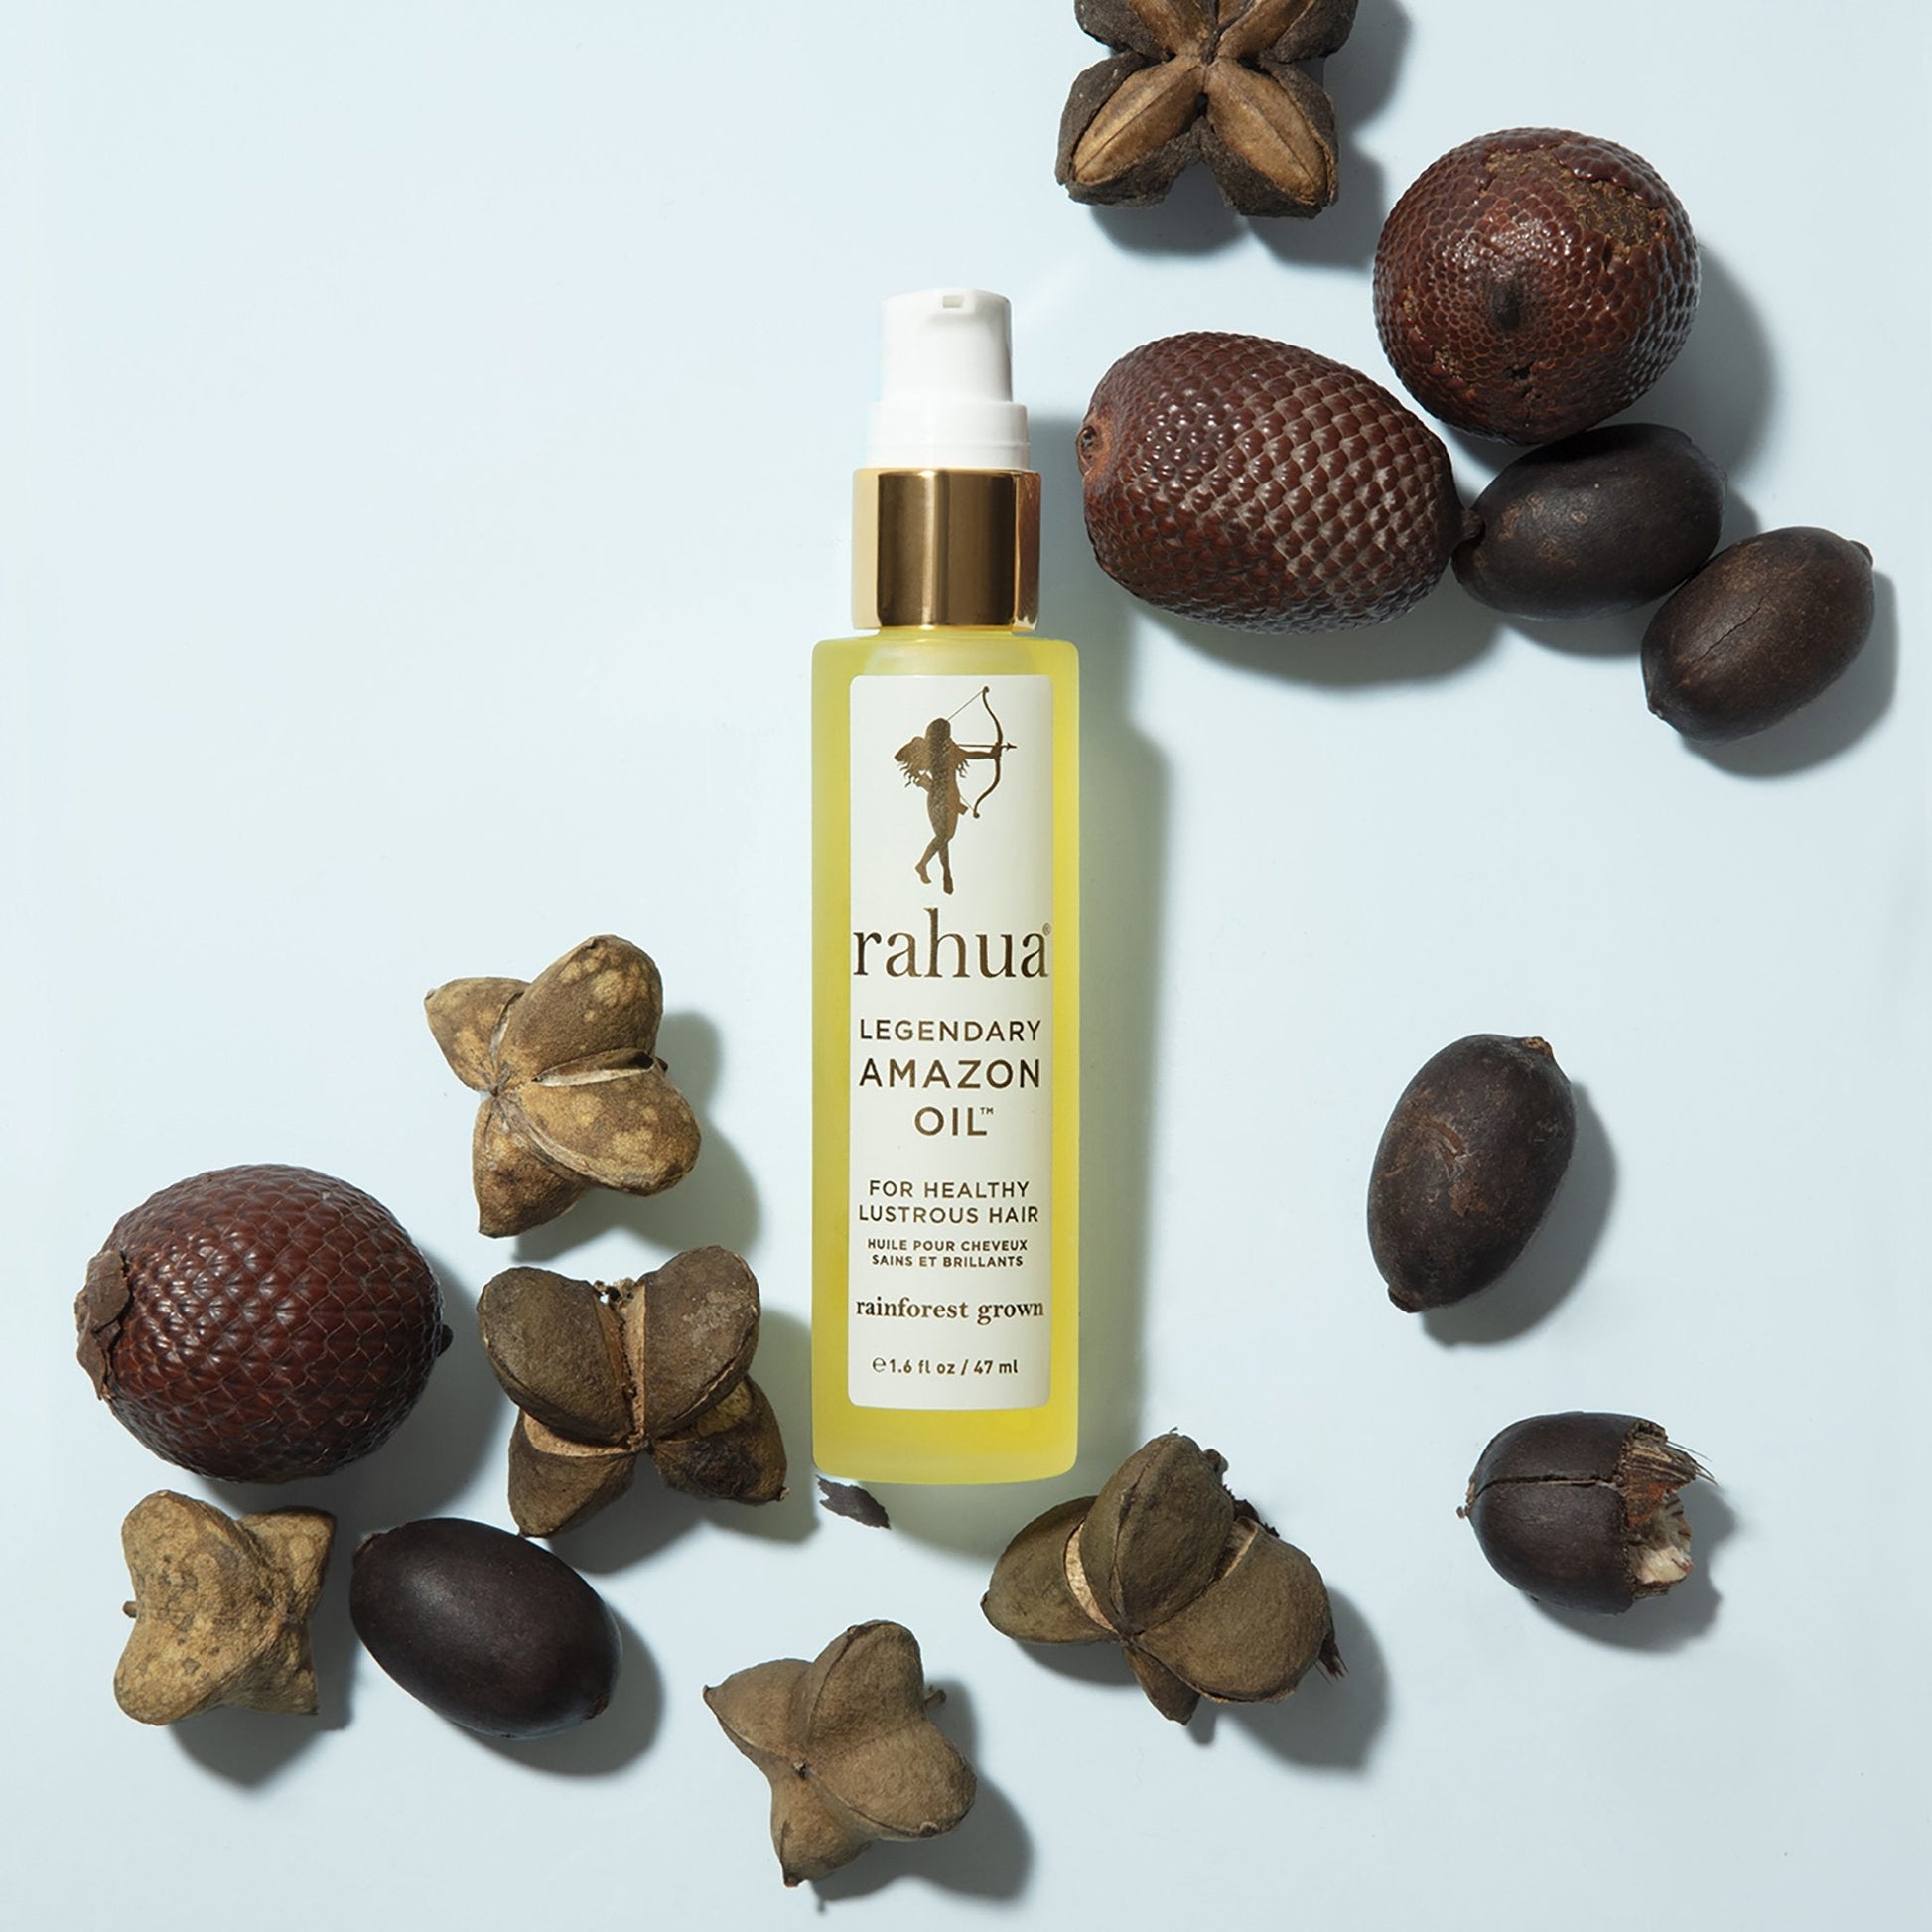 Rahua legendary amazon oil with natural ingredients rahua seeds, morete seeds and sacha inchi dry flowers